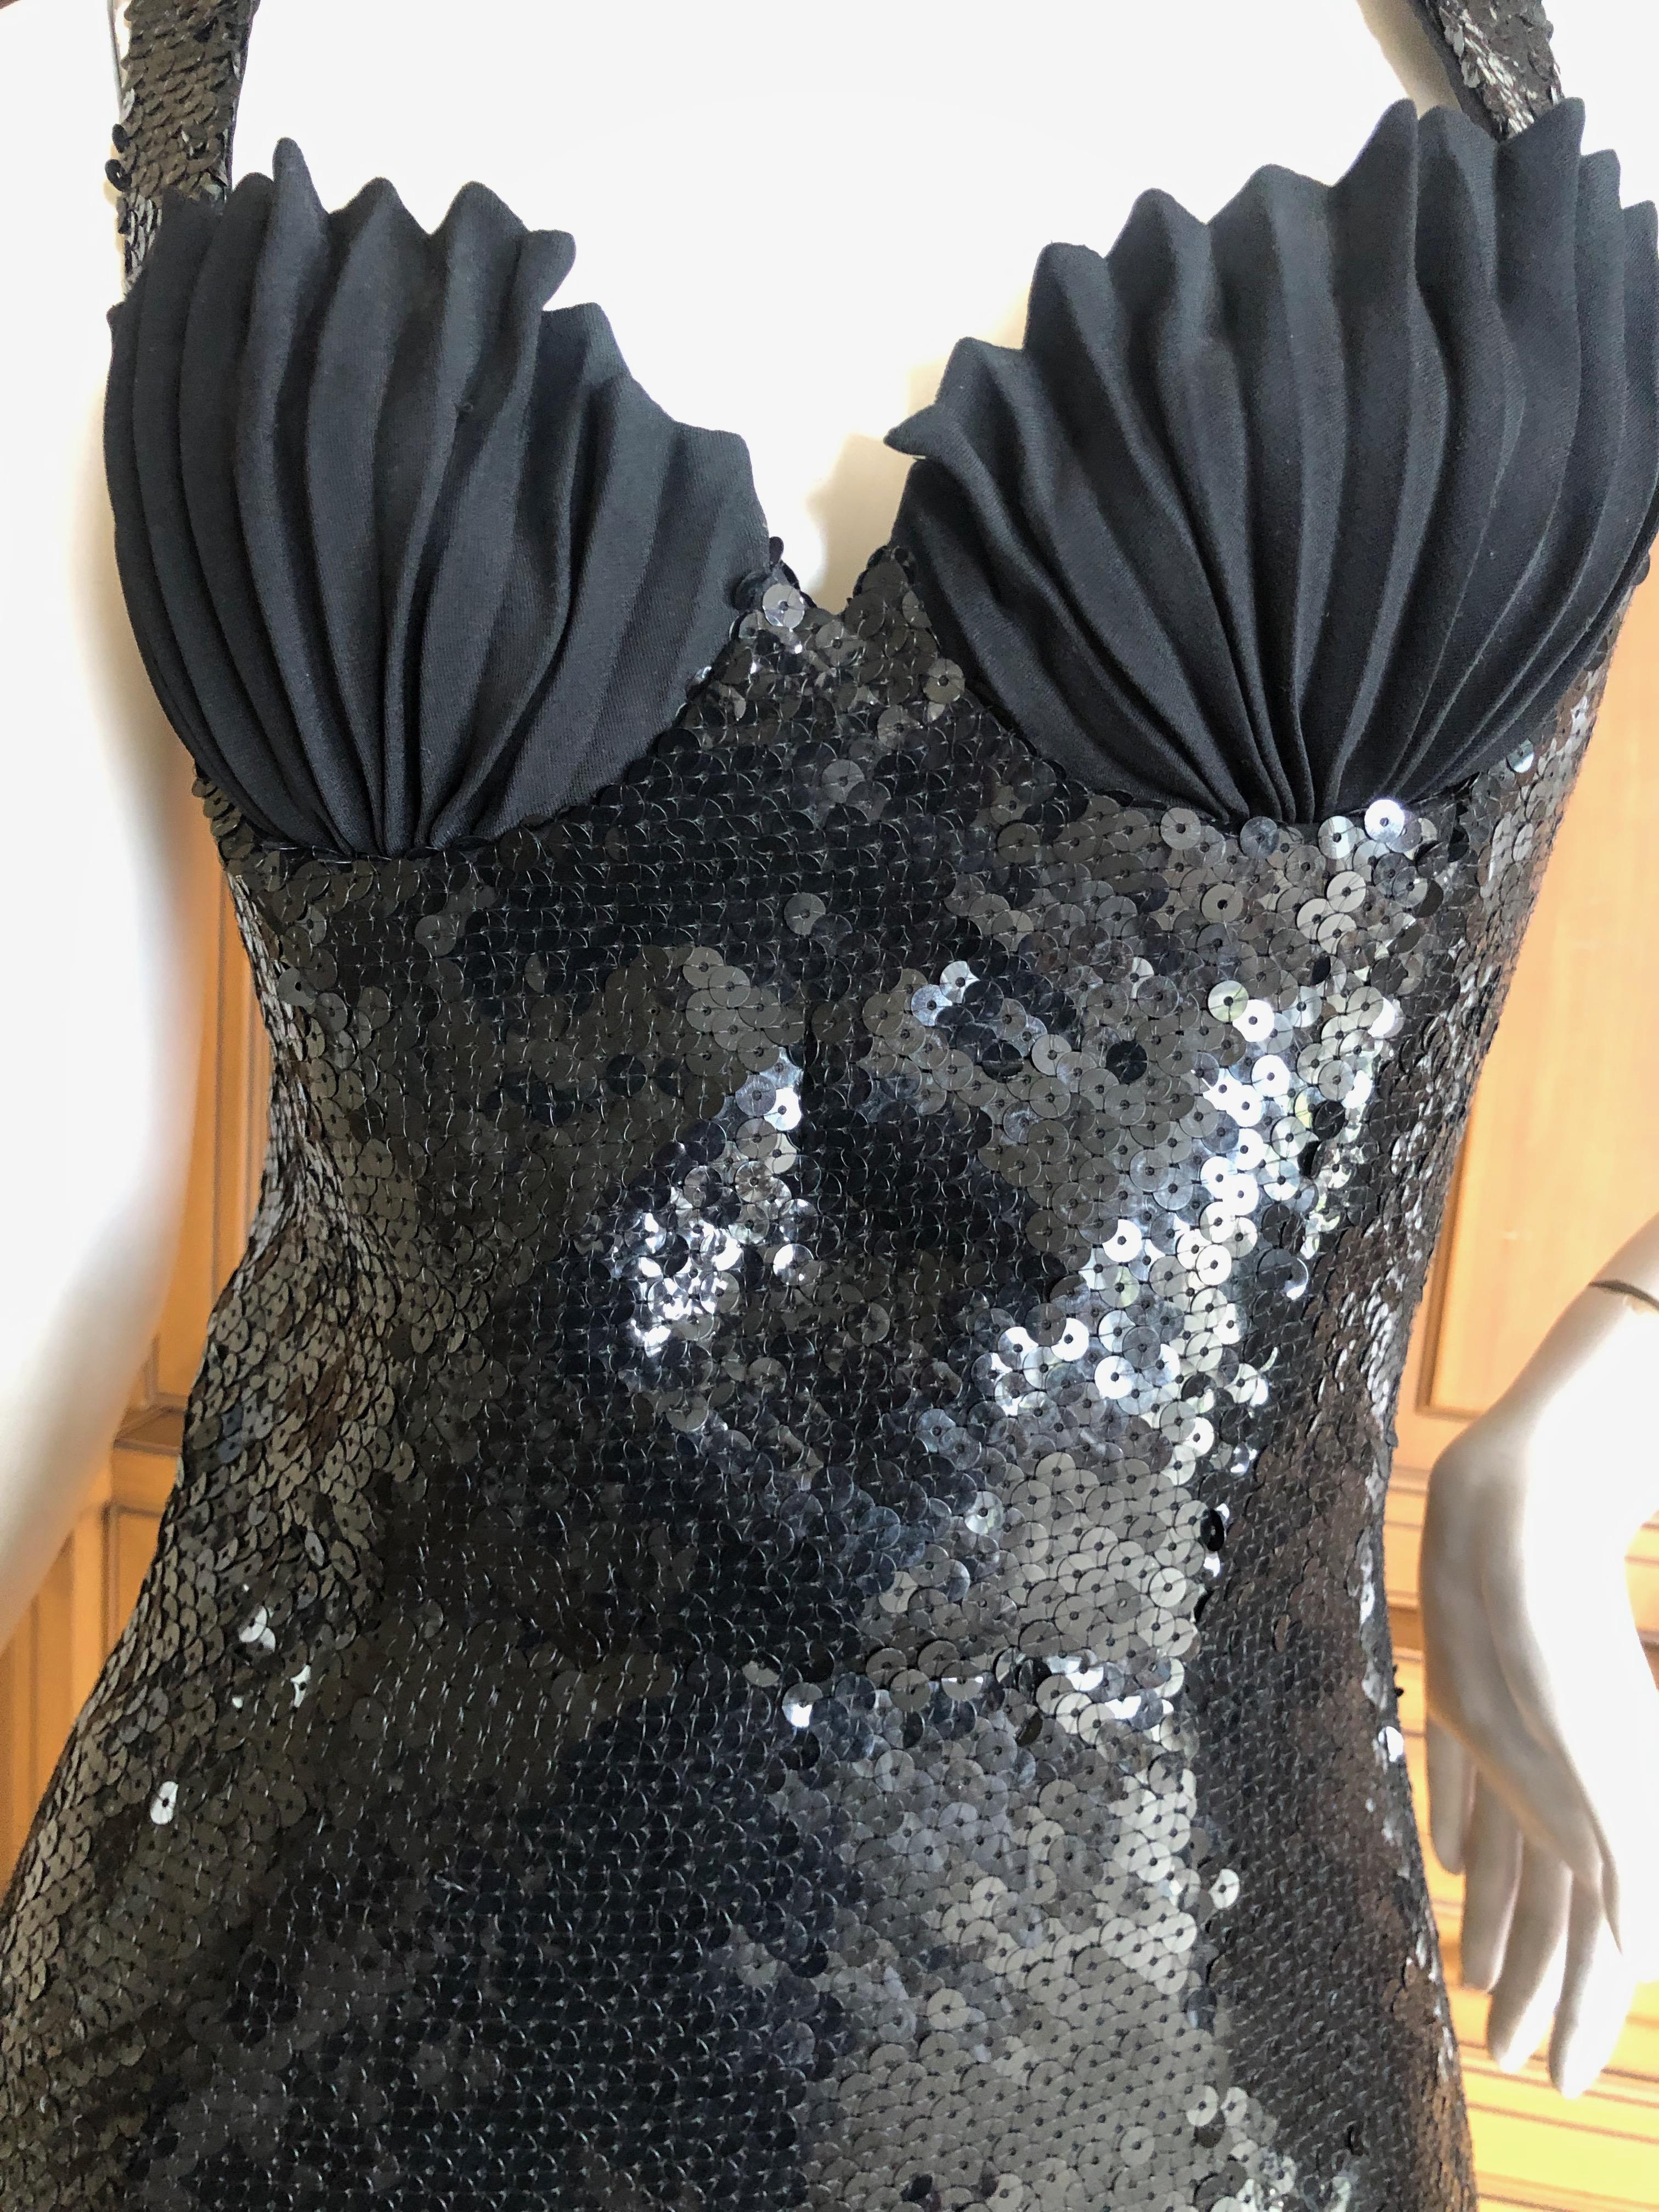 Thierry Mugler Vintage 1980's Sequin Little Black Dress w Pleated Shell Bust
So charming, use zoom feature to see details
Size 40
  Bust 36